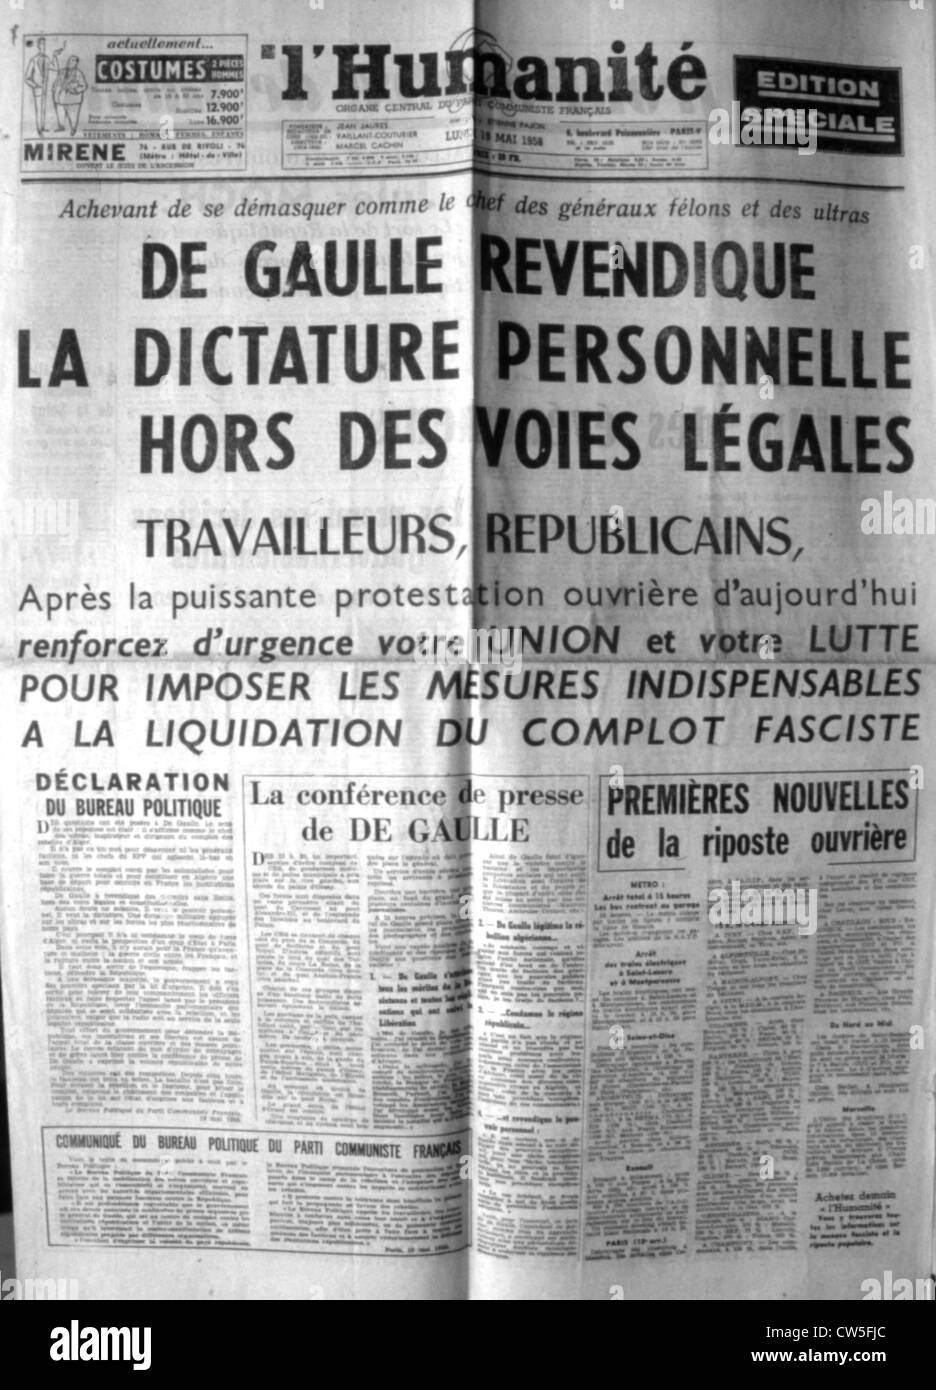 War in Algeria, Front page of the newspaper 'L'Humanité' Stock Photo